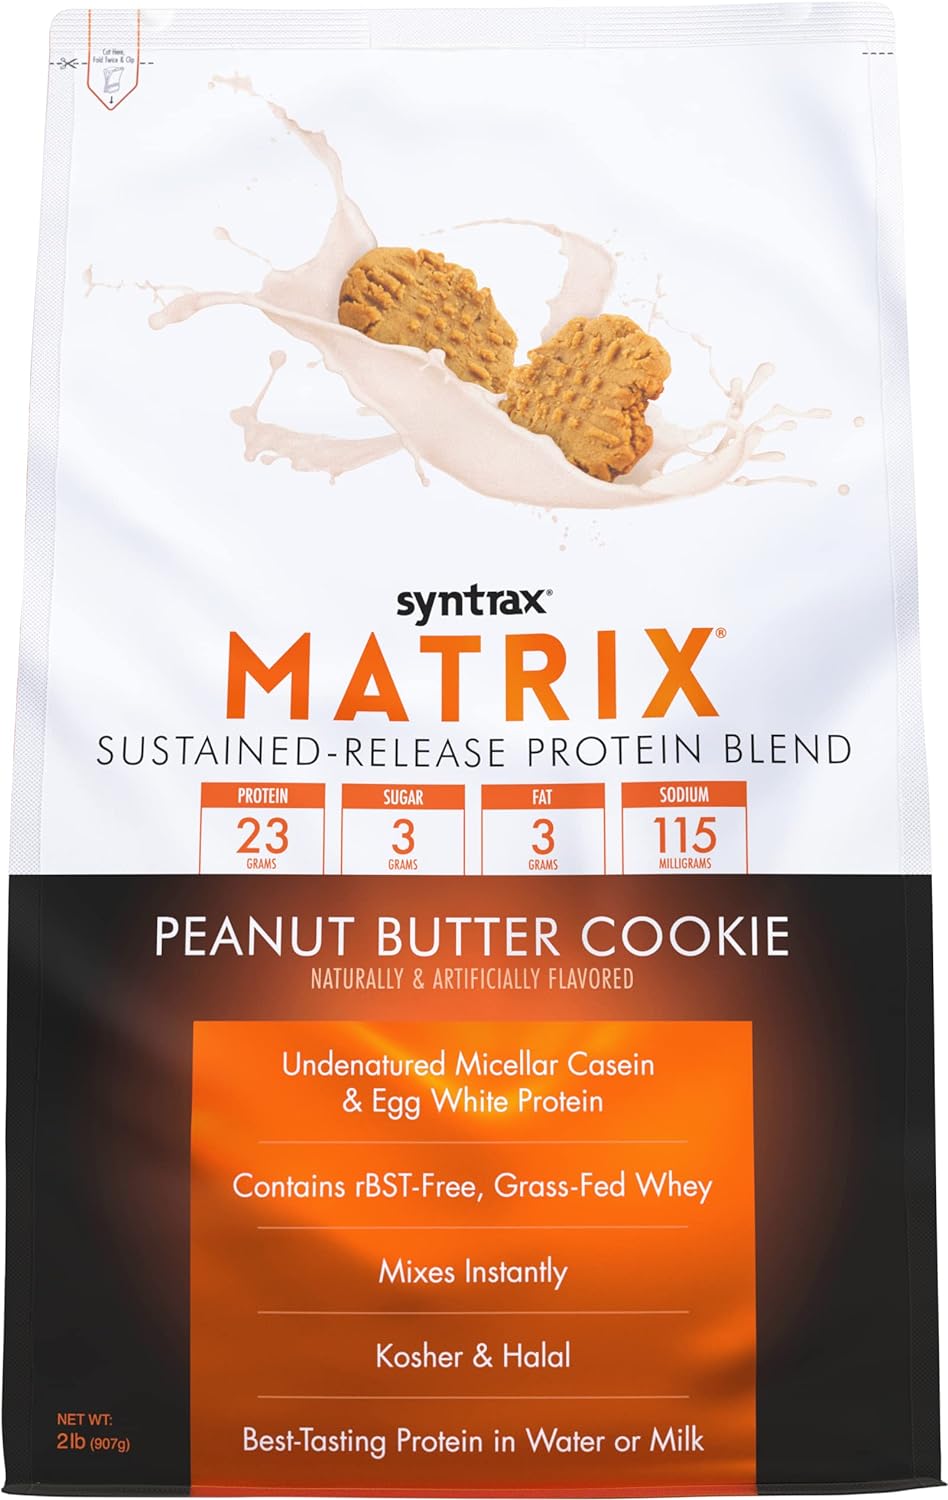 Syntrax,-Matrix-2-Sustained-Release-Protein-Blend,-164